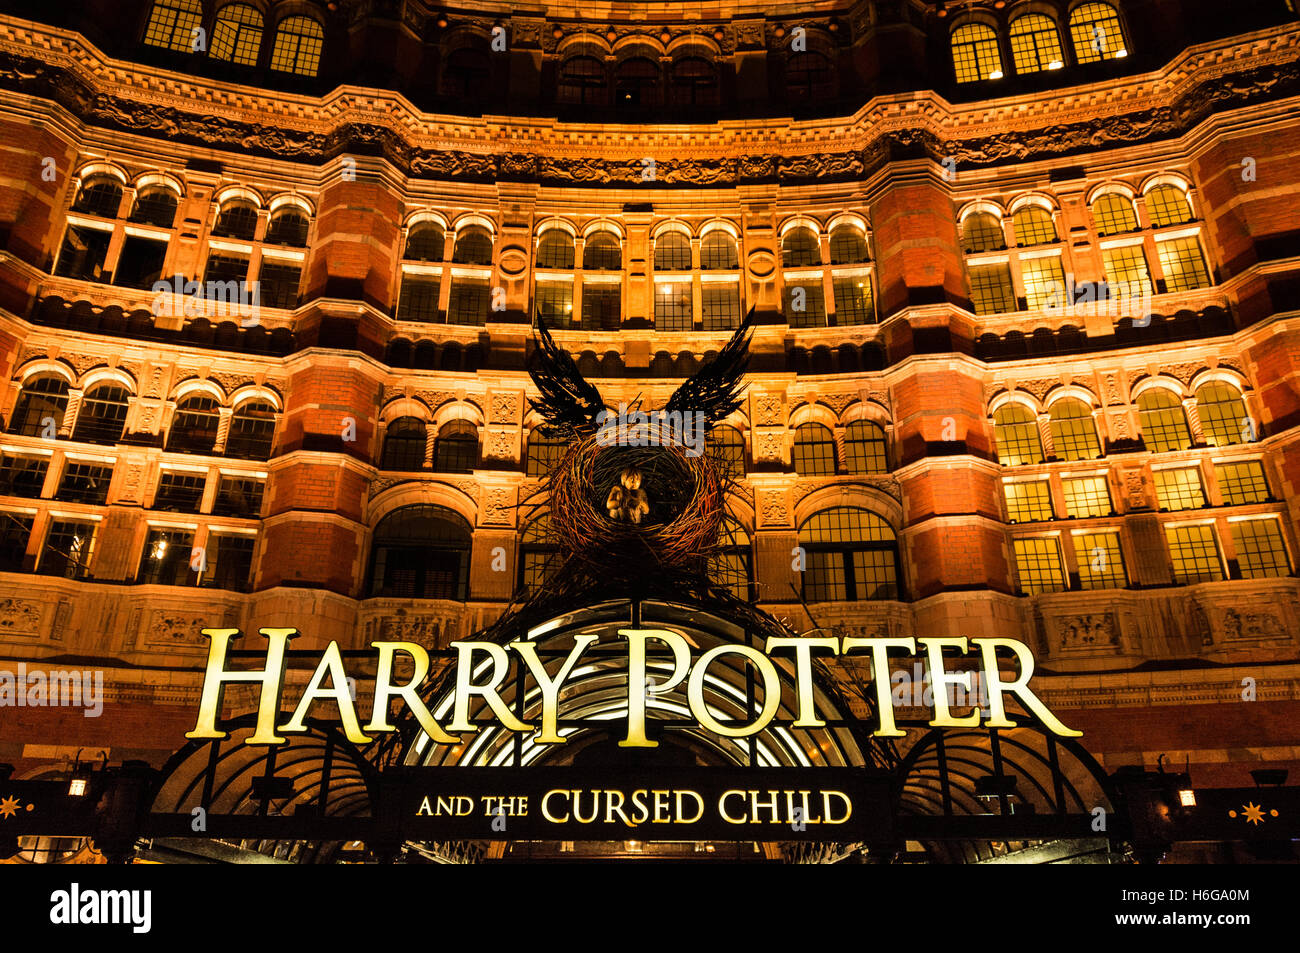 Harry Potter And The Cursed Child at the Palace Theatre London Stock